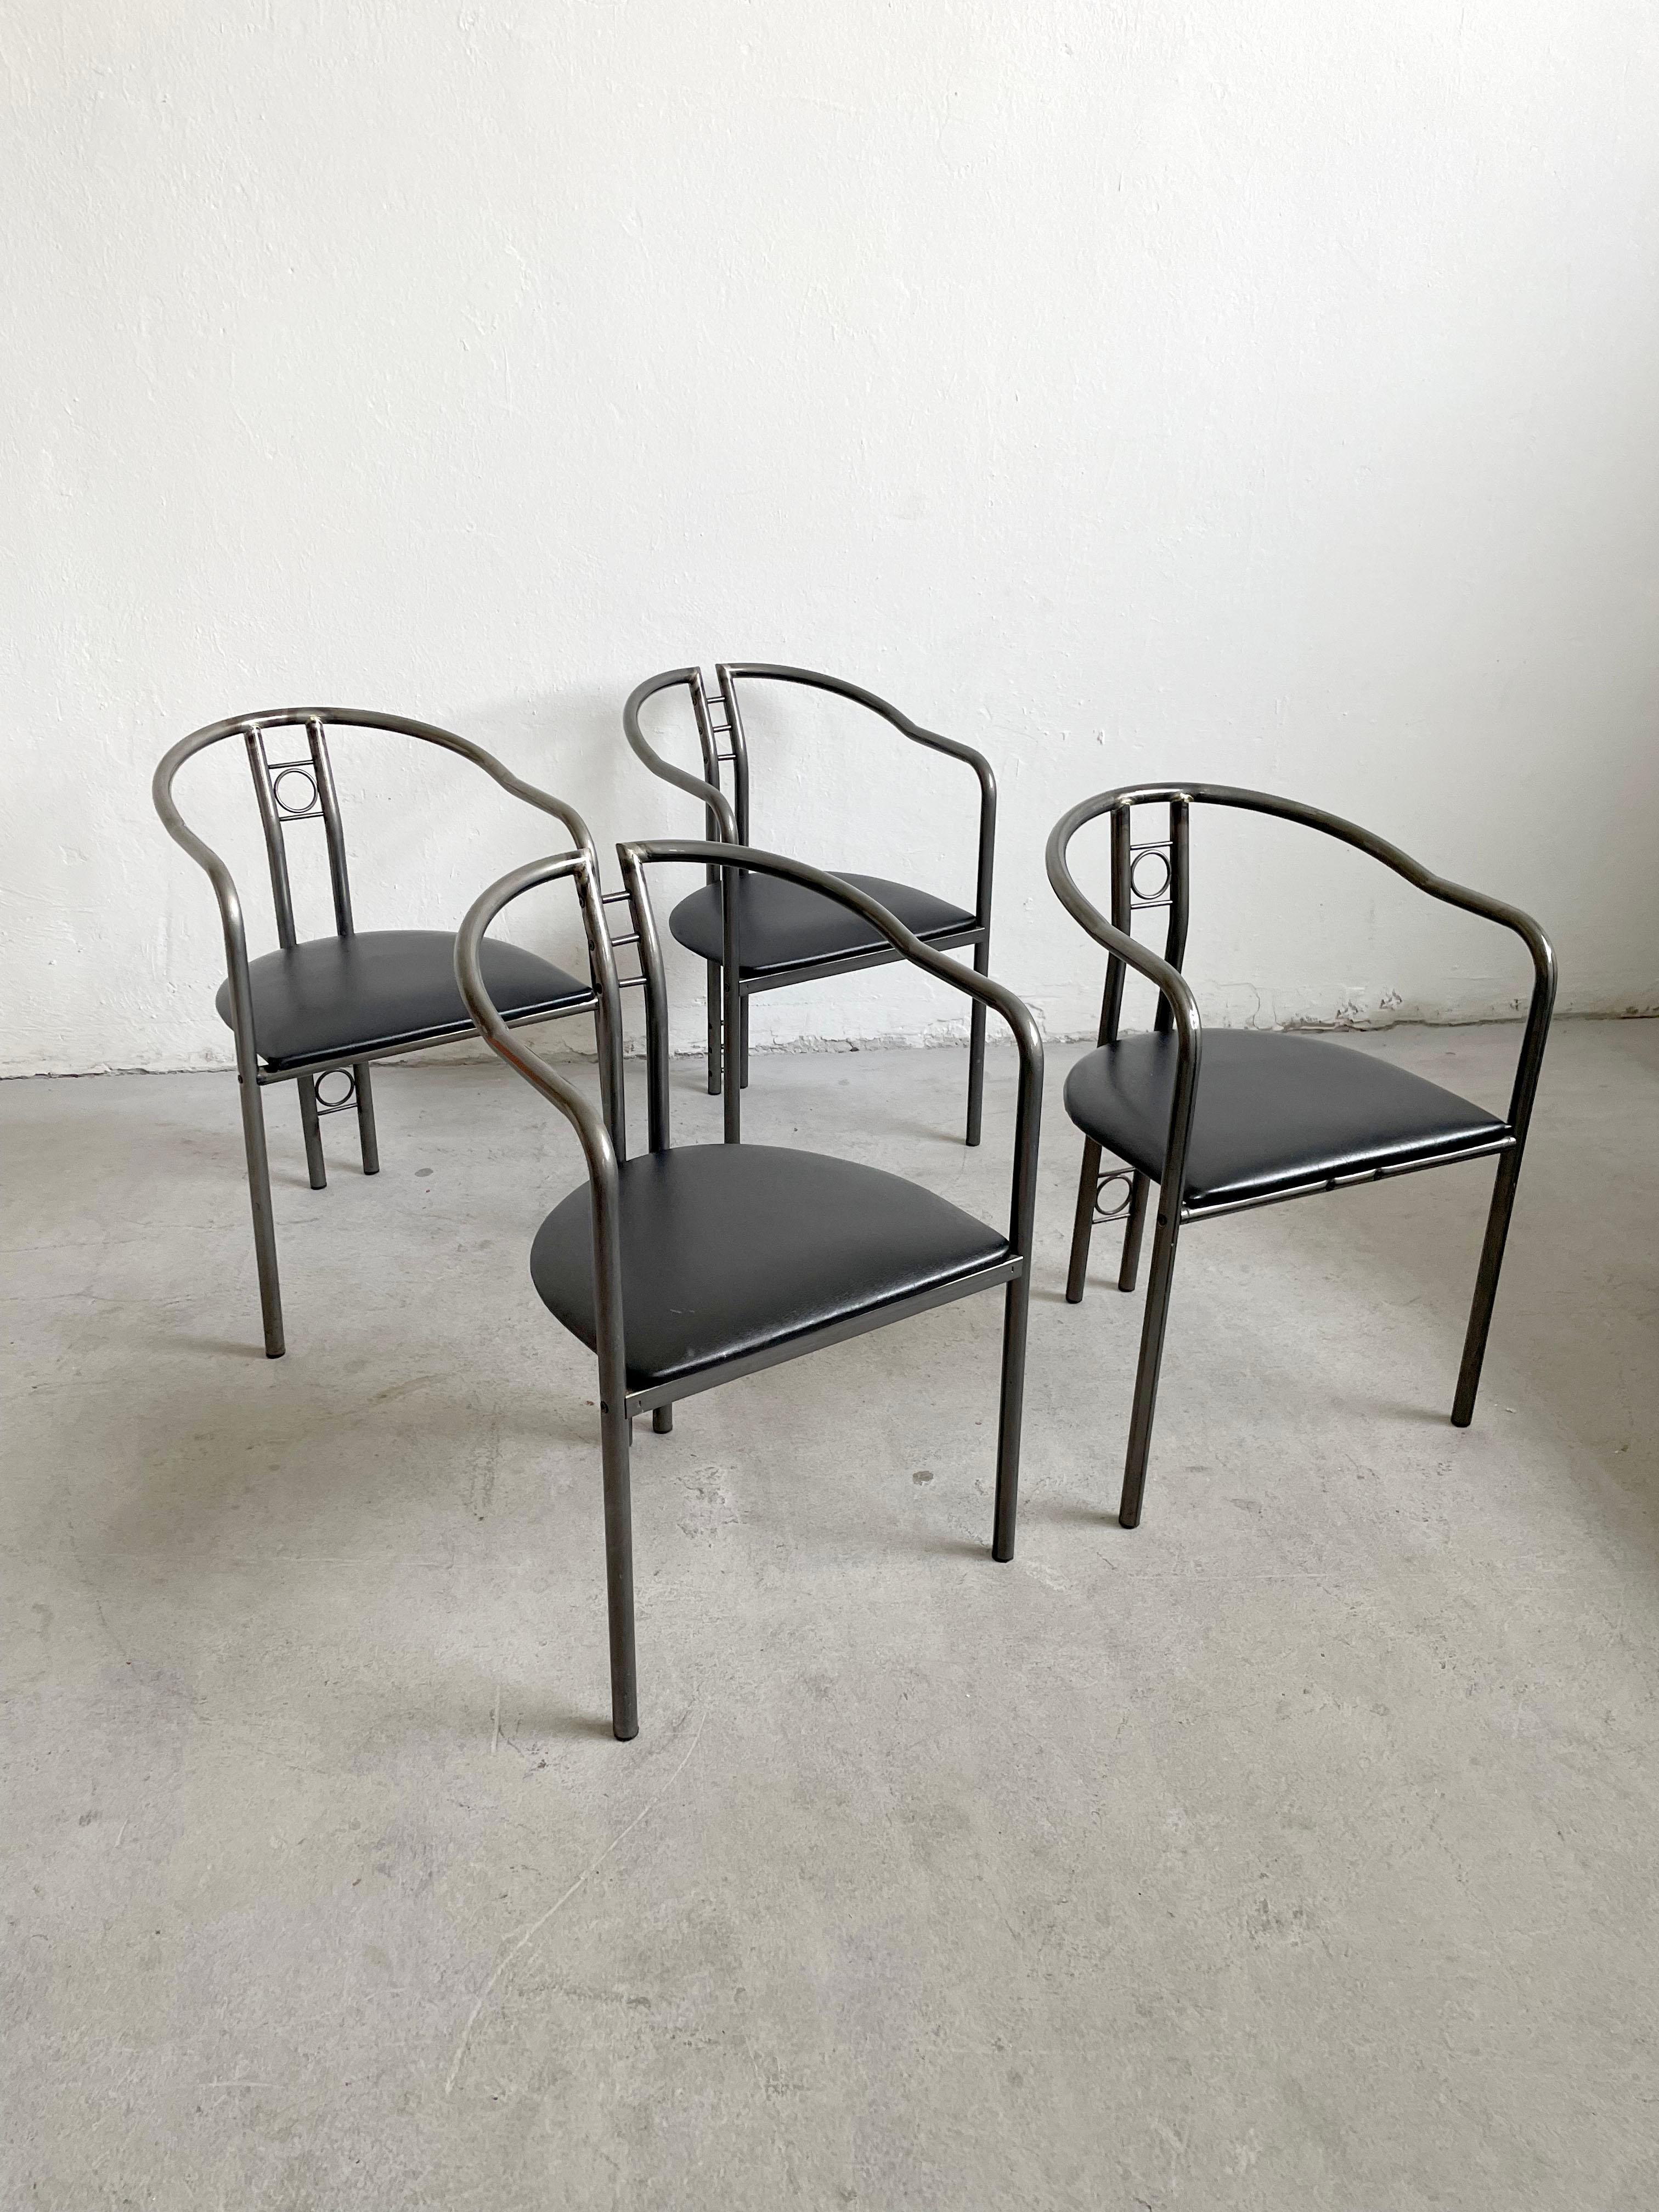 Beautifully manufactured and designed Belgian post modern dining chairs from the 1980's, set of 4

Brass frame with seat upholstered in black faux leather

The chairs are in very good vintage condition with minor traces of cosmetic wear